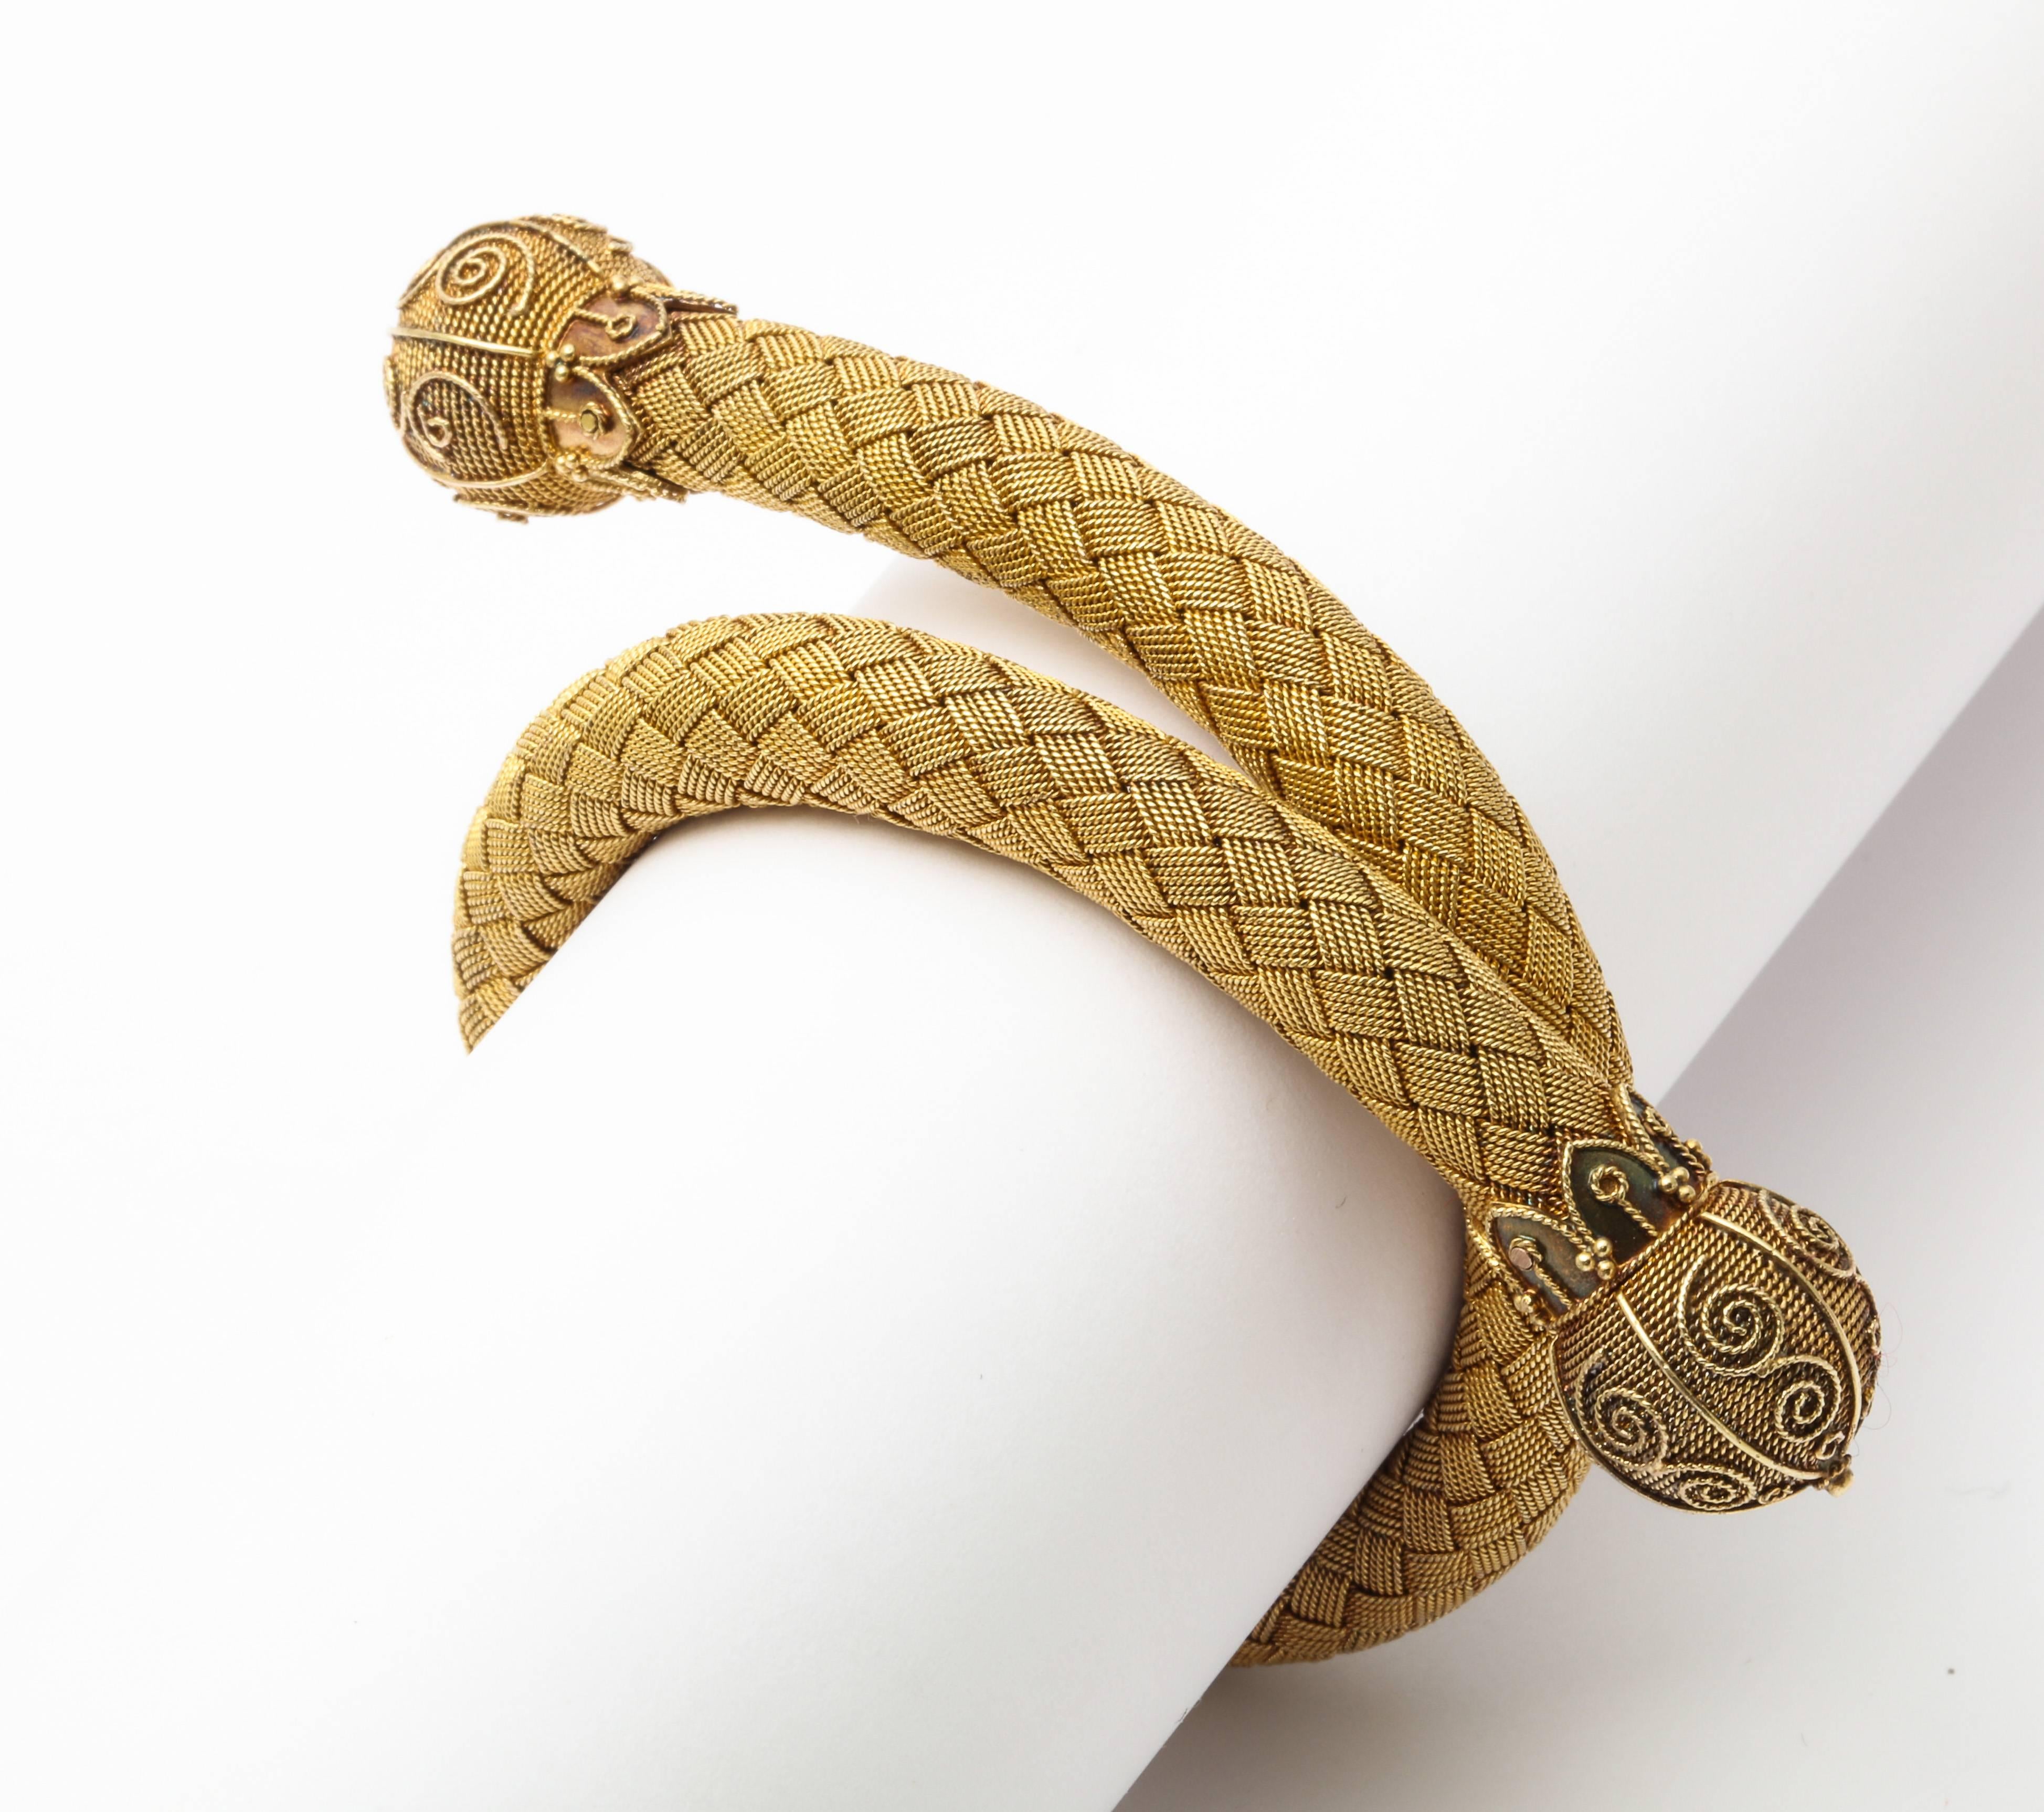 A wonderful woven mesh flexible bracelet with gold filigree ends in snake form 